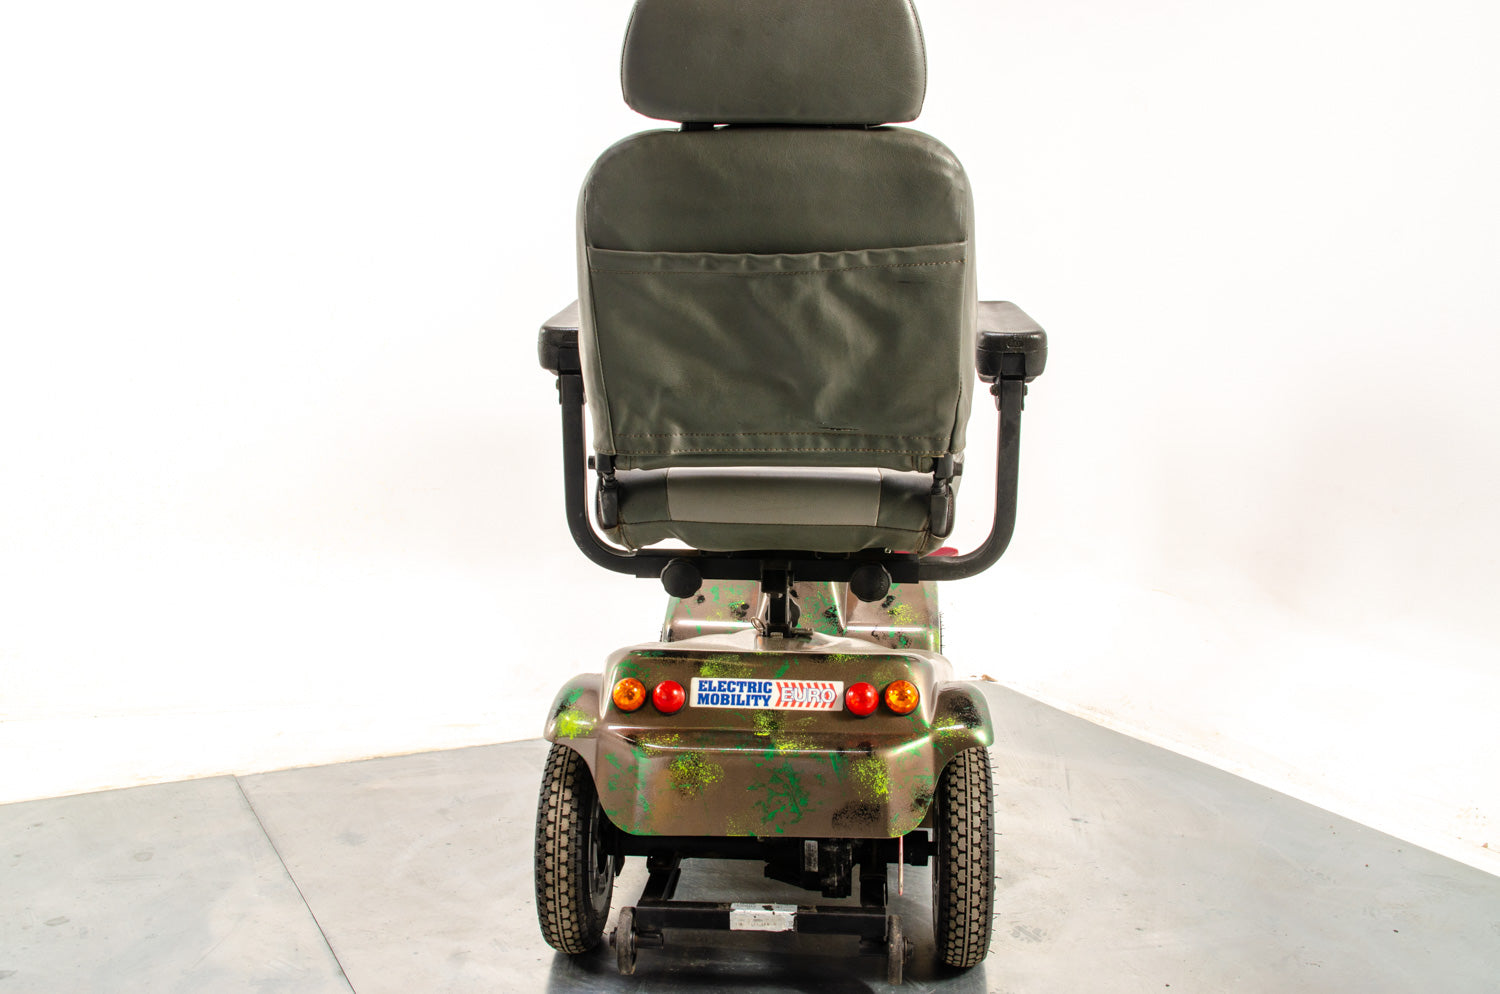 Rascal 388XL All-Terrain Used Electric Mobility Scooter 6mph Road Pavement Suspension Custom Camo